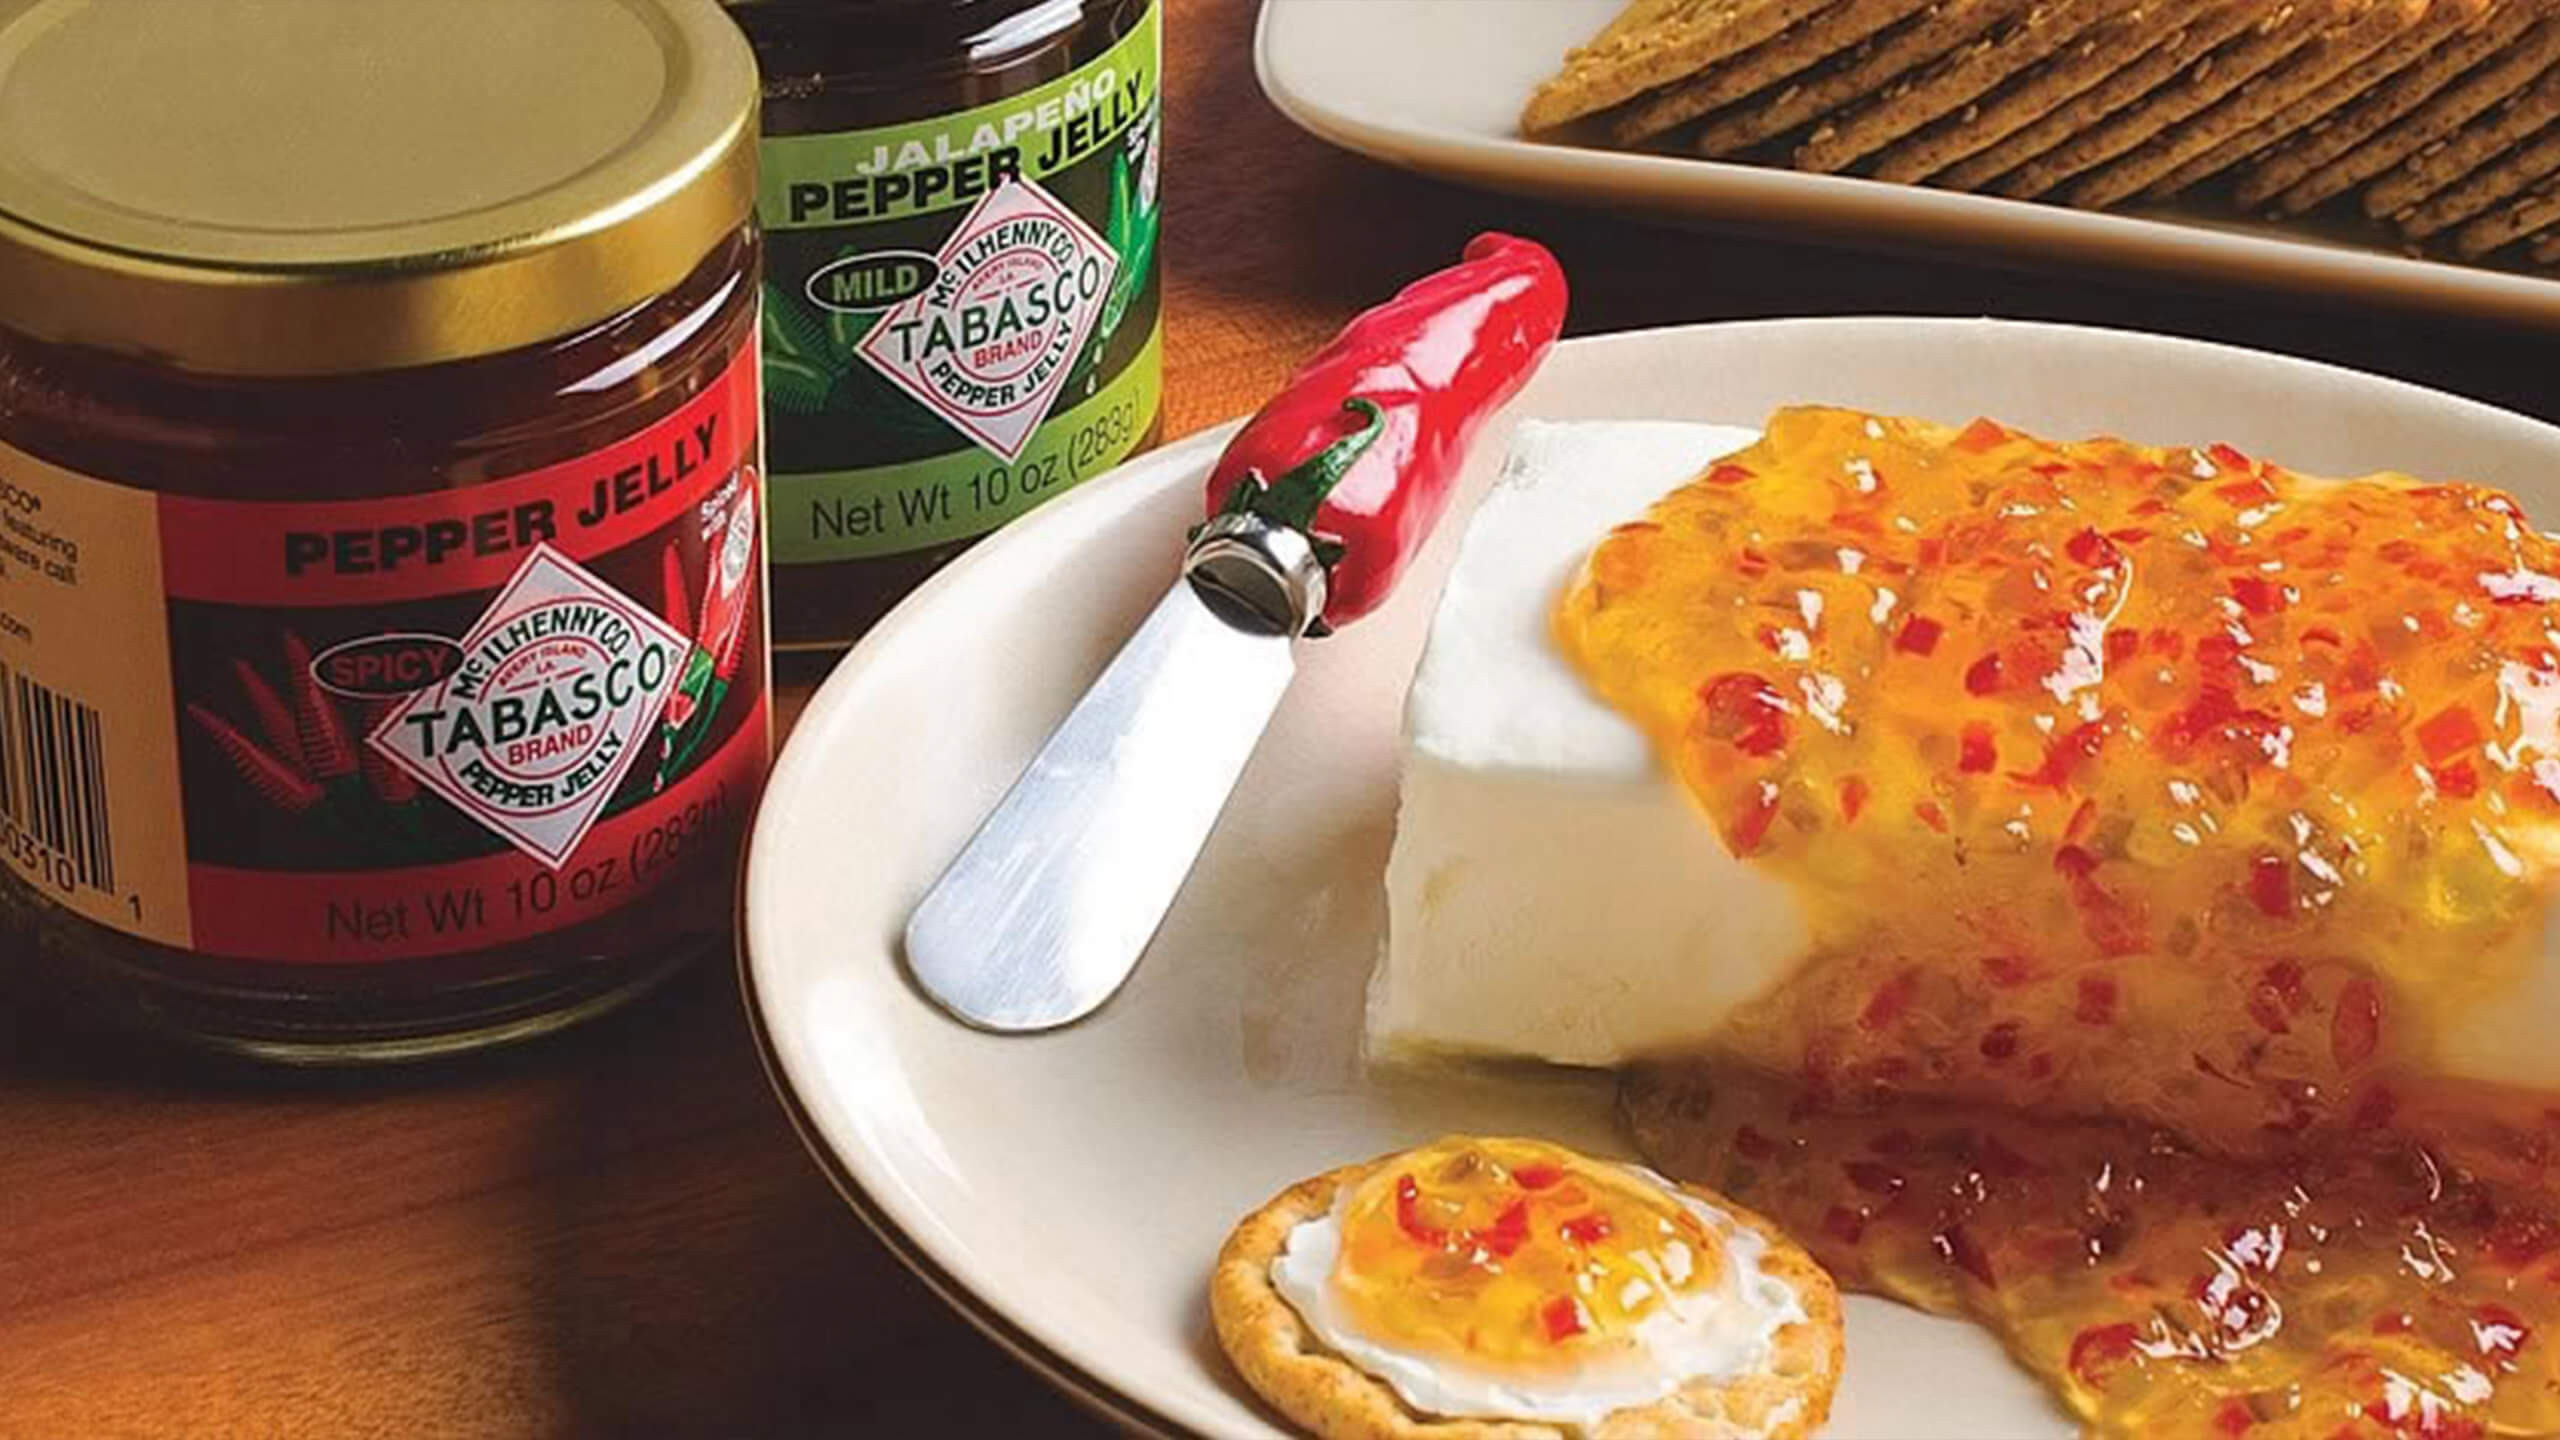 Cream Cheese Appetizers Jelly
 TABASCO Pepper Jelly and Cream Cheese Recipe